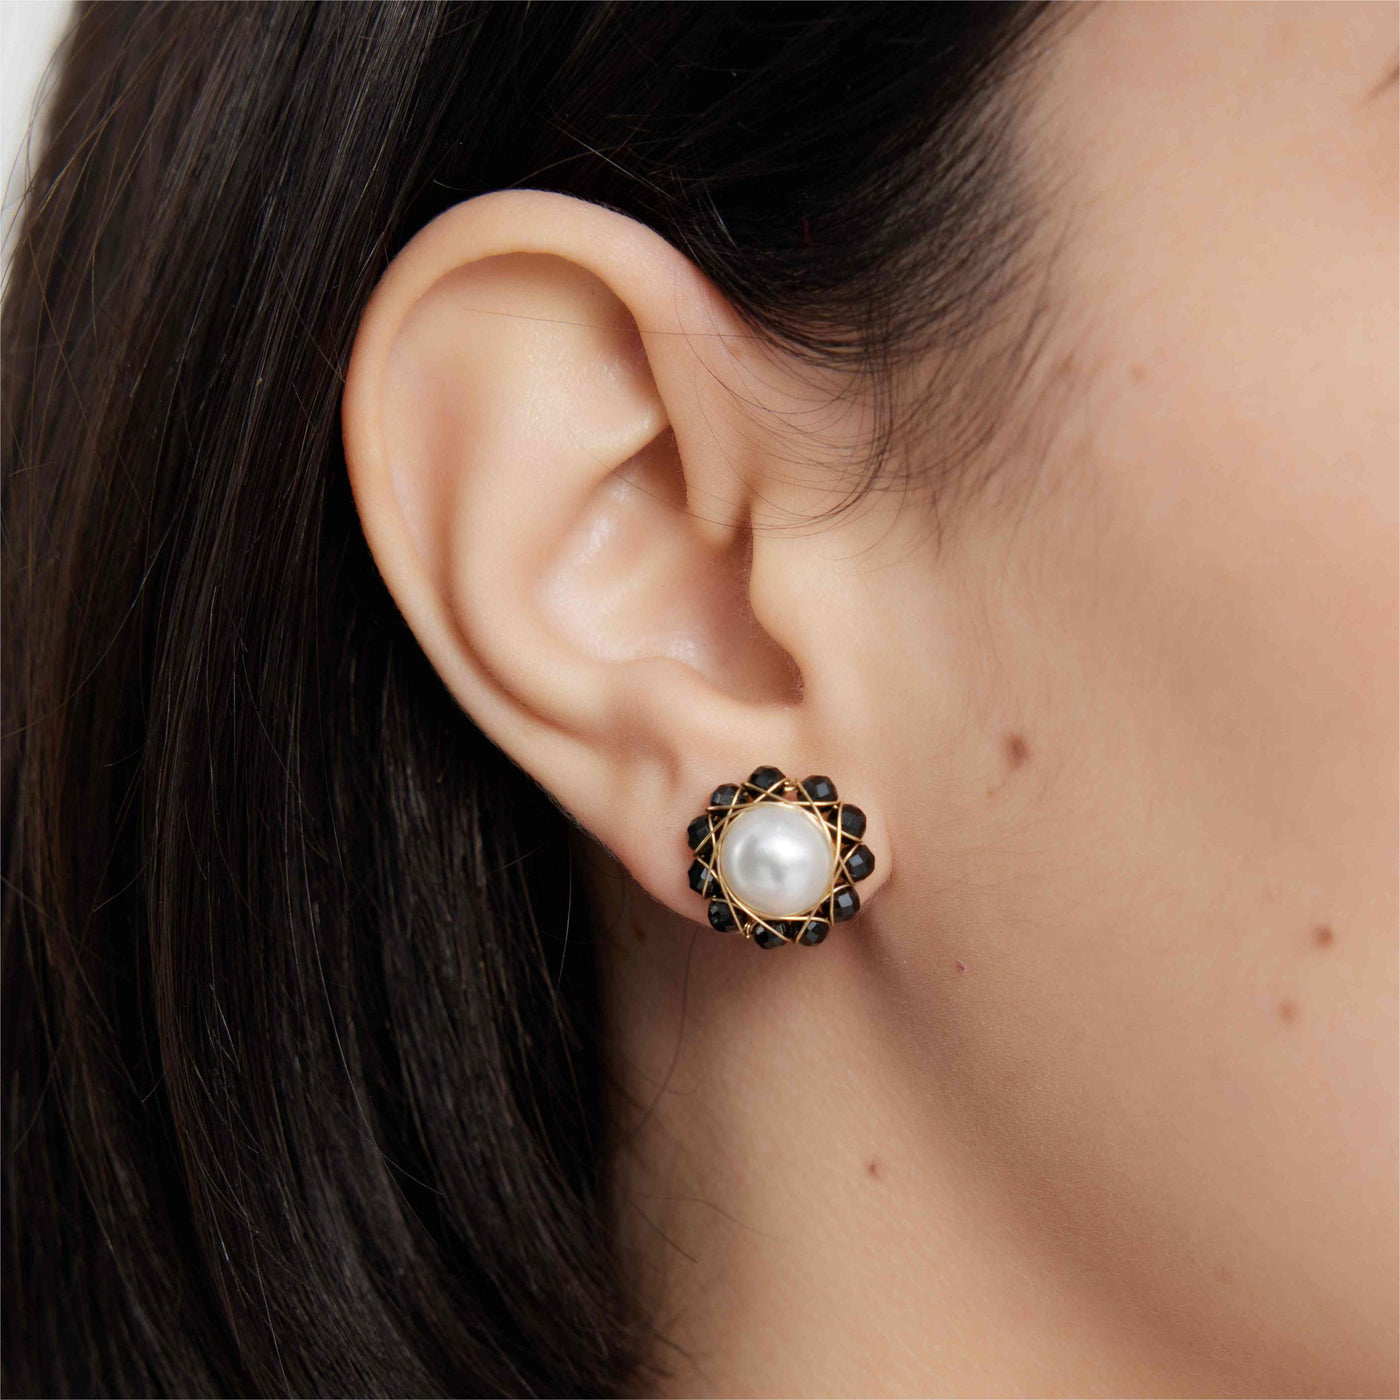 COCO KIM Mix Colors Series Black Spinel  & Pearl Stud Earrings